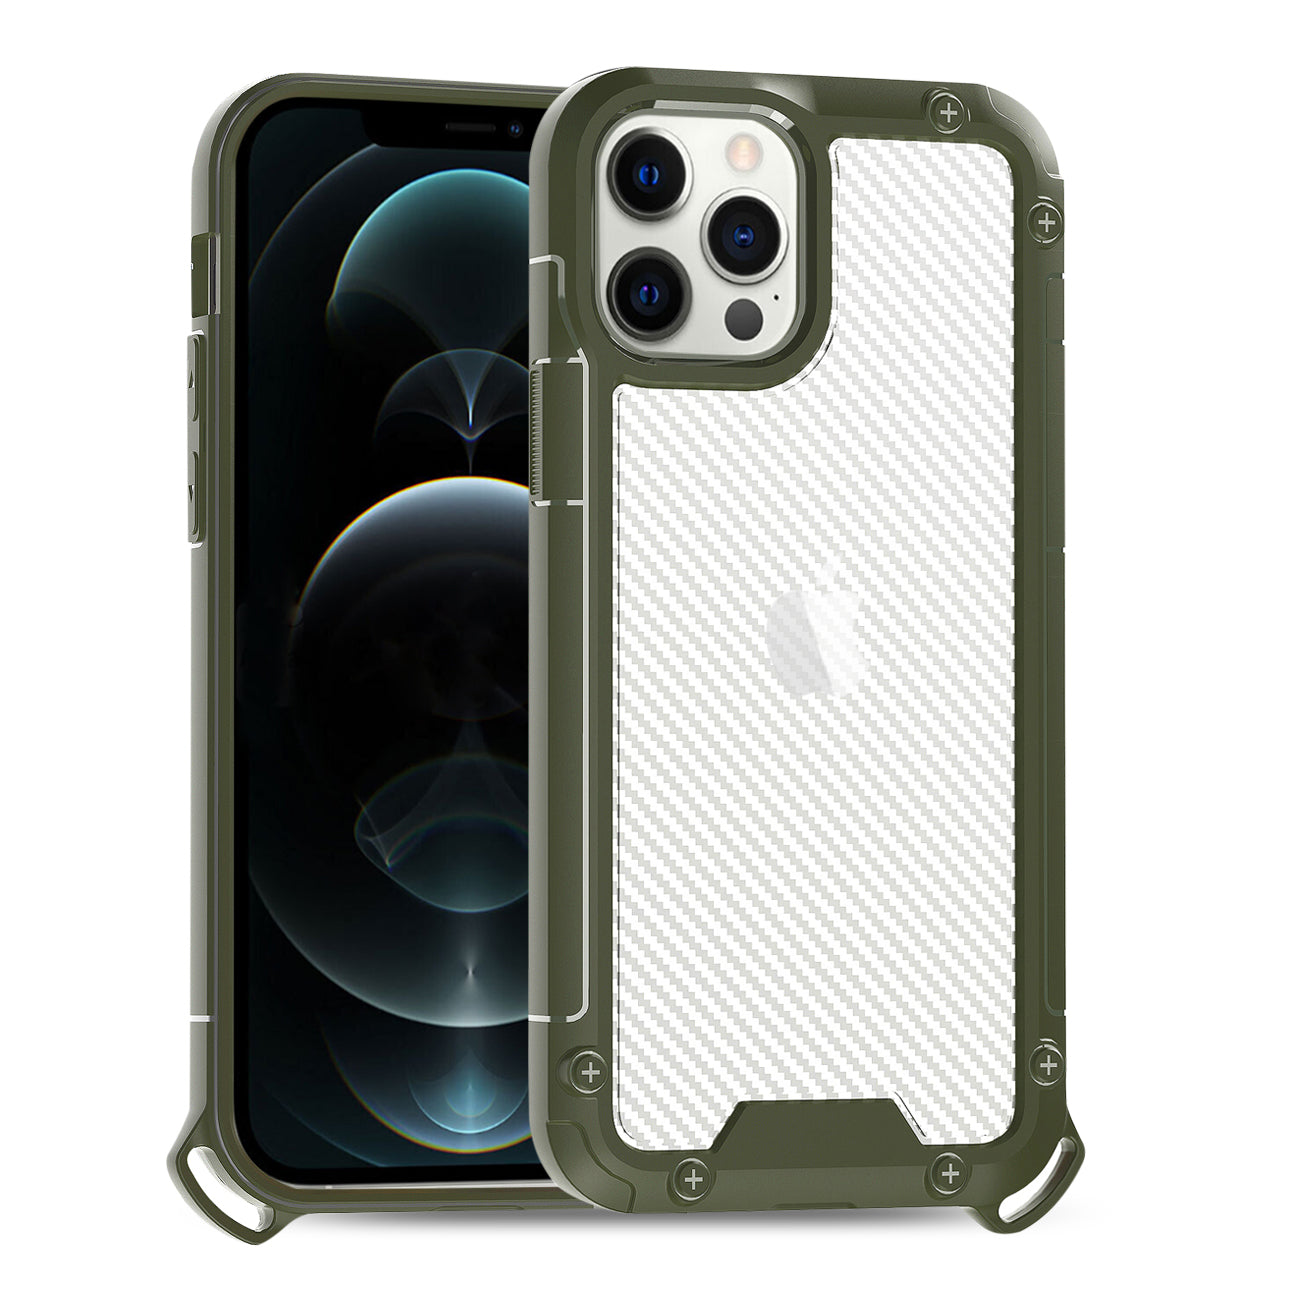 Reiko Shockproof PC Bumper Case With Carbon Fiber Pattern In Green For iPhone 12 / 12 Pro